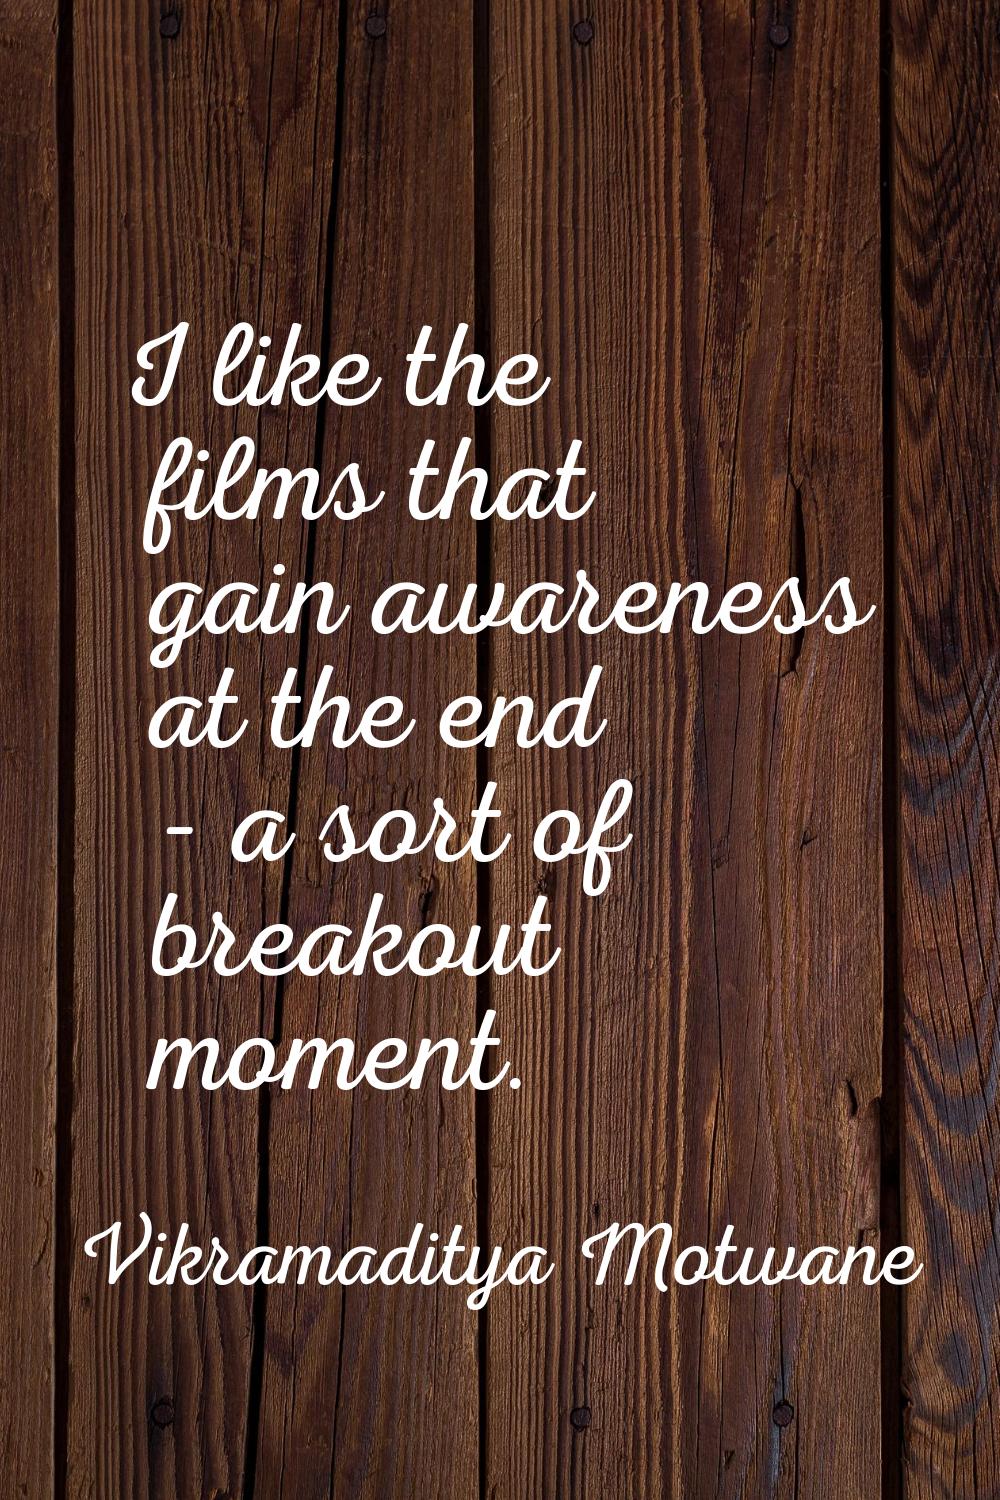 I like the films that gain awareness at the end - a sort of breakout moment.